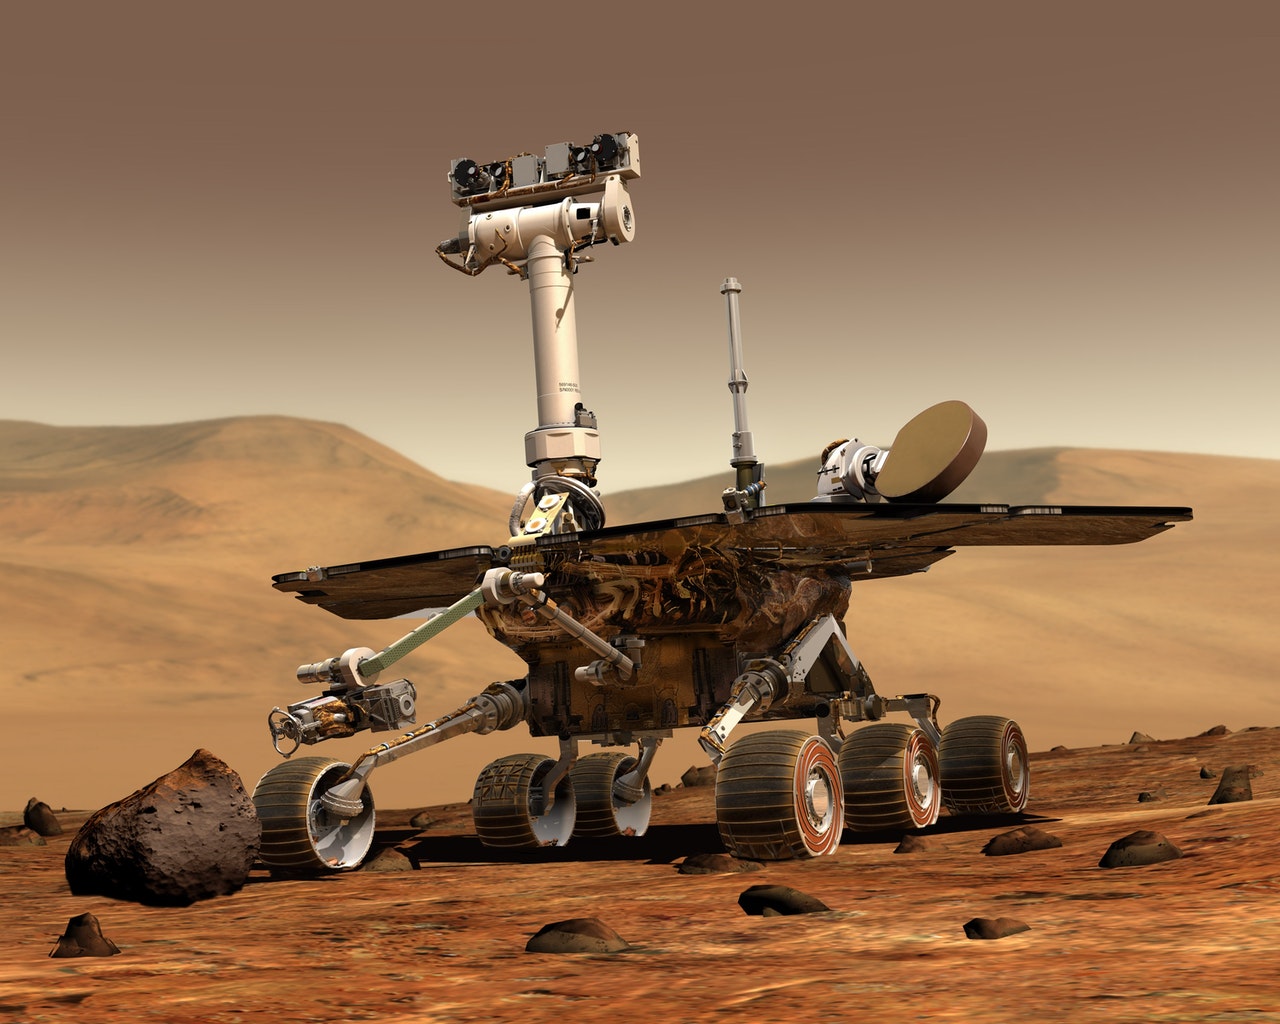 NASA Mars Rover and Helicopter Tracker: Mission Details and Where to Check Location